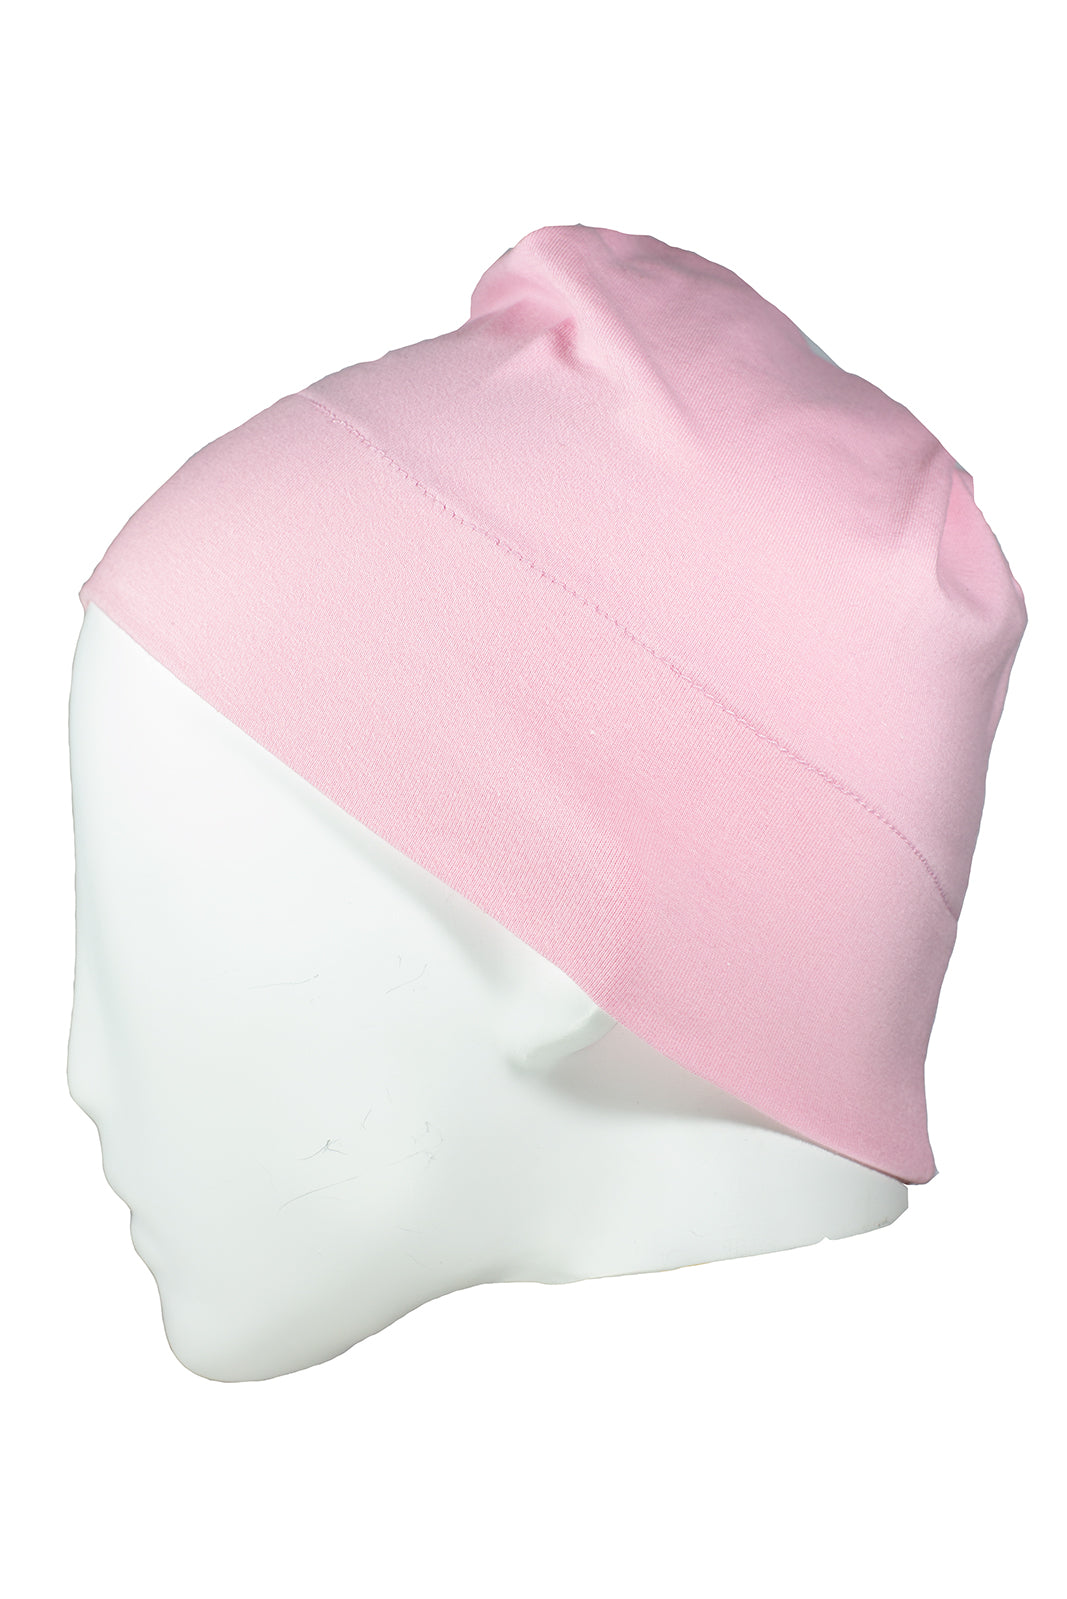 Cap in Light Pink xccscss.